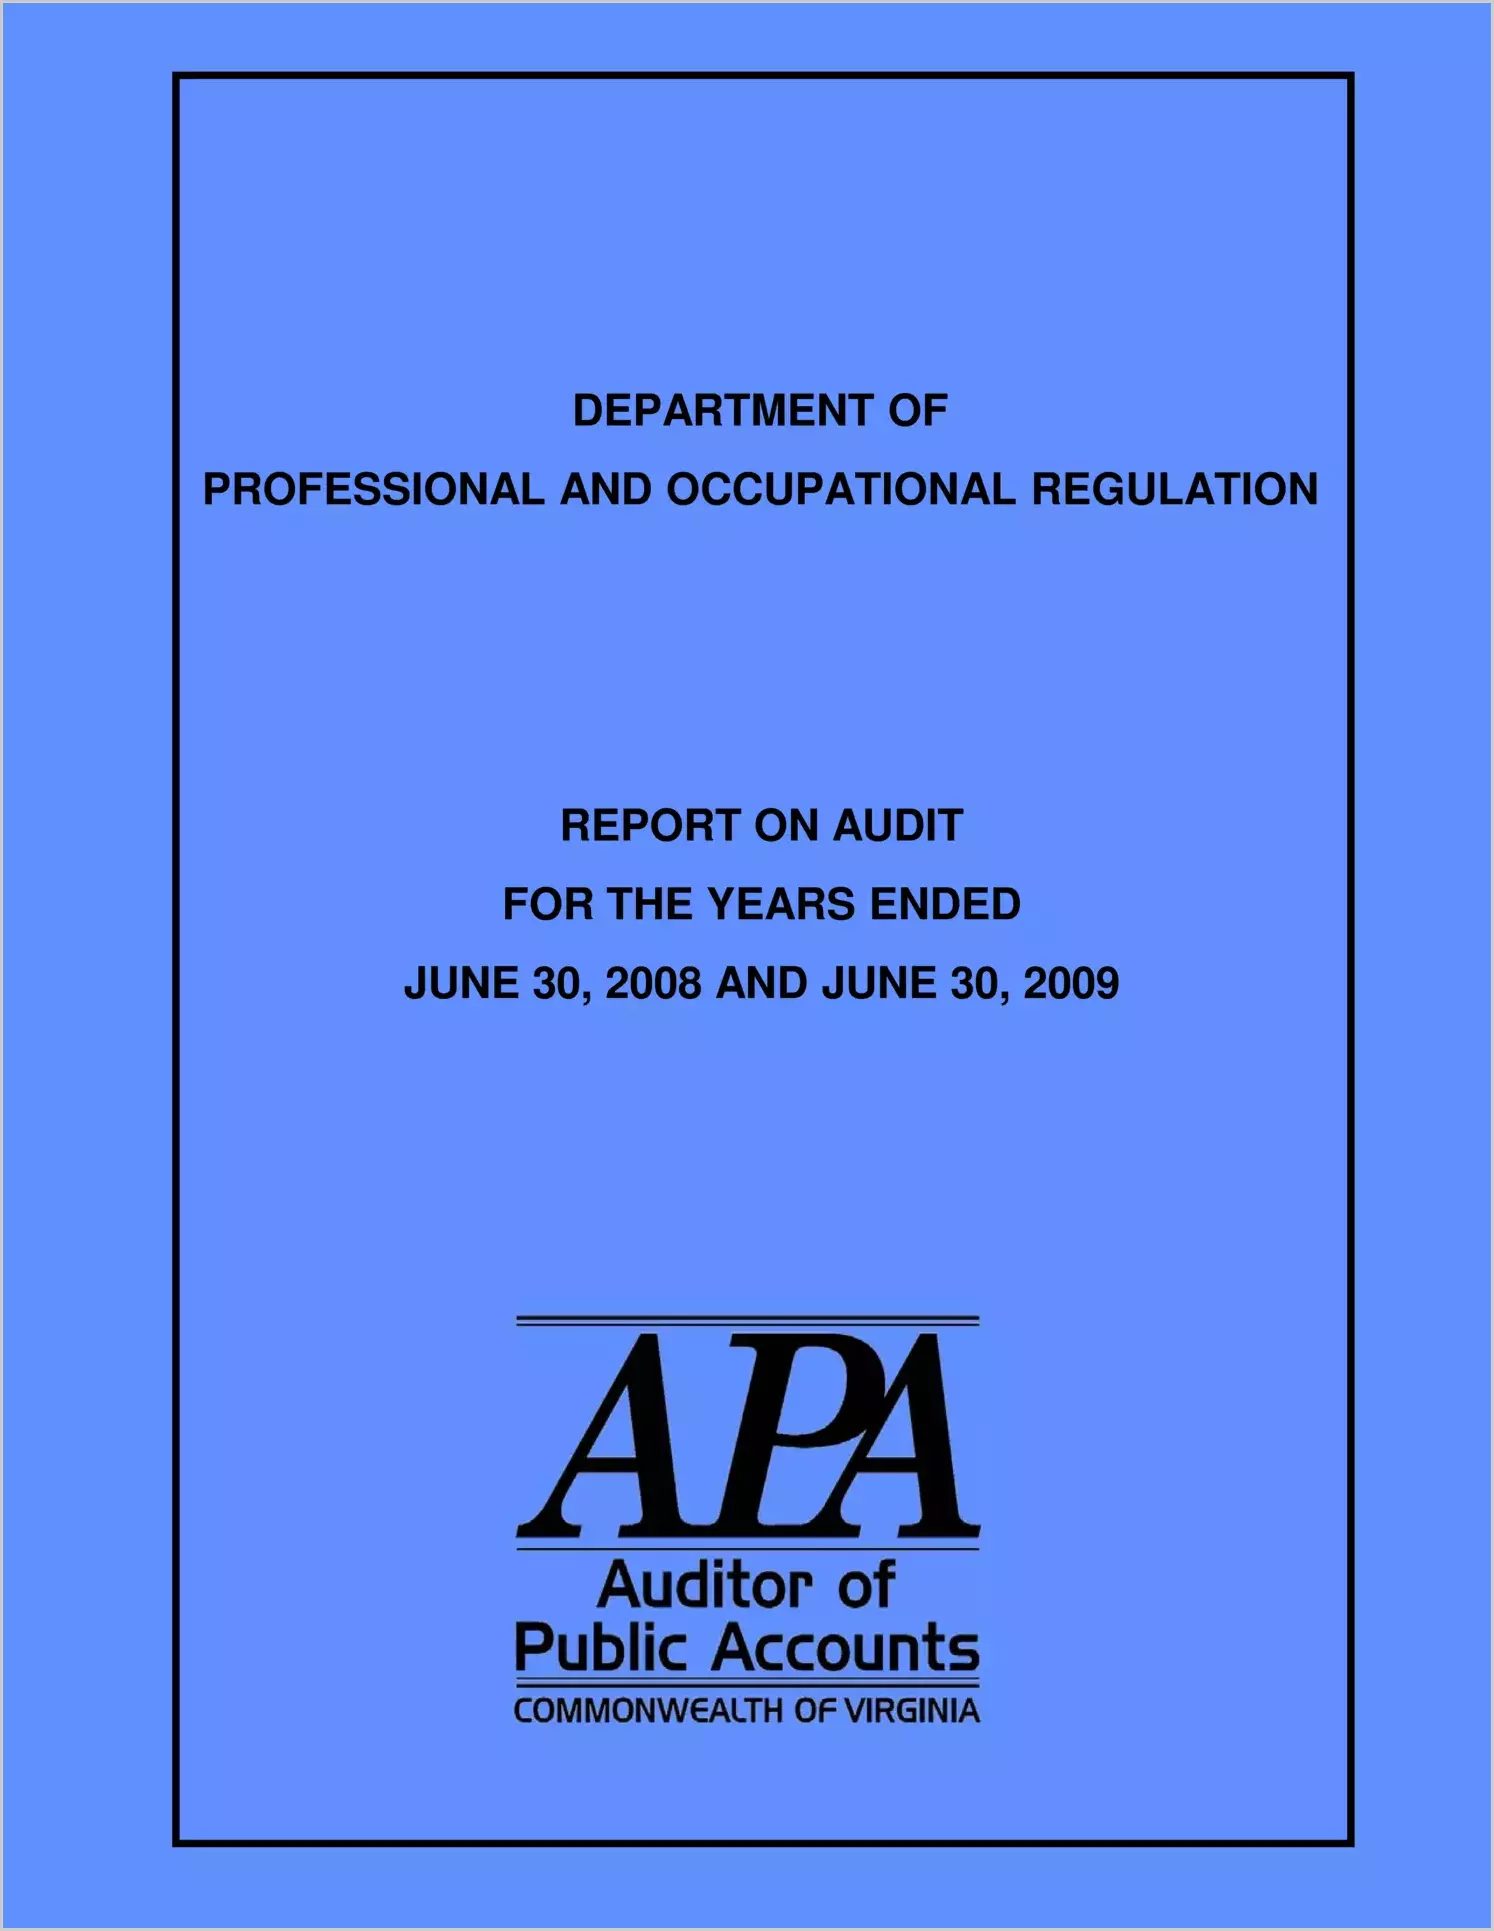 Department of Professional and Occupational Regulation report on audit for the years ended June 30, 2008 through June 30, 2009